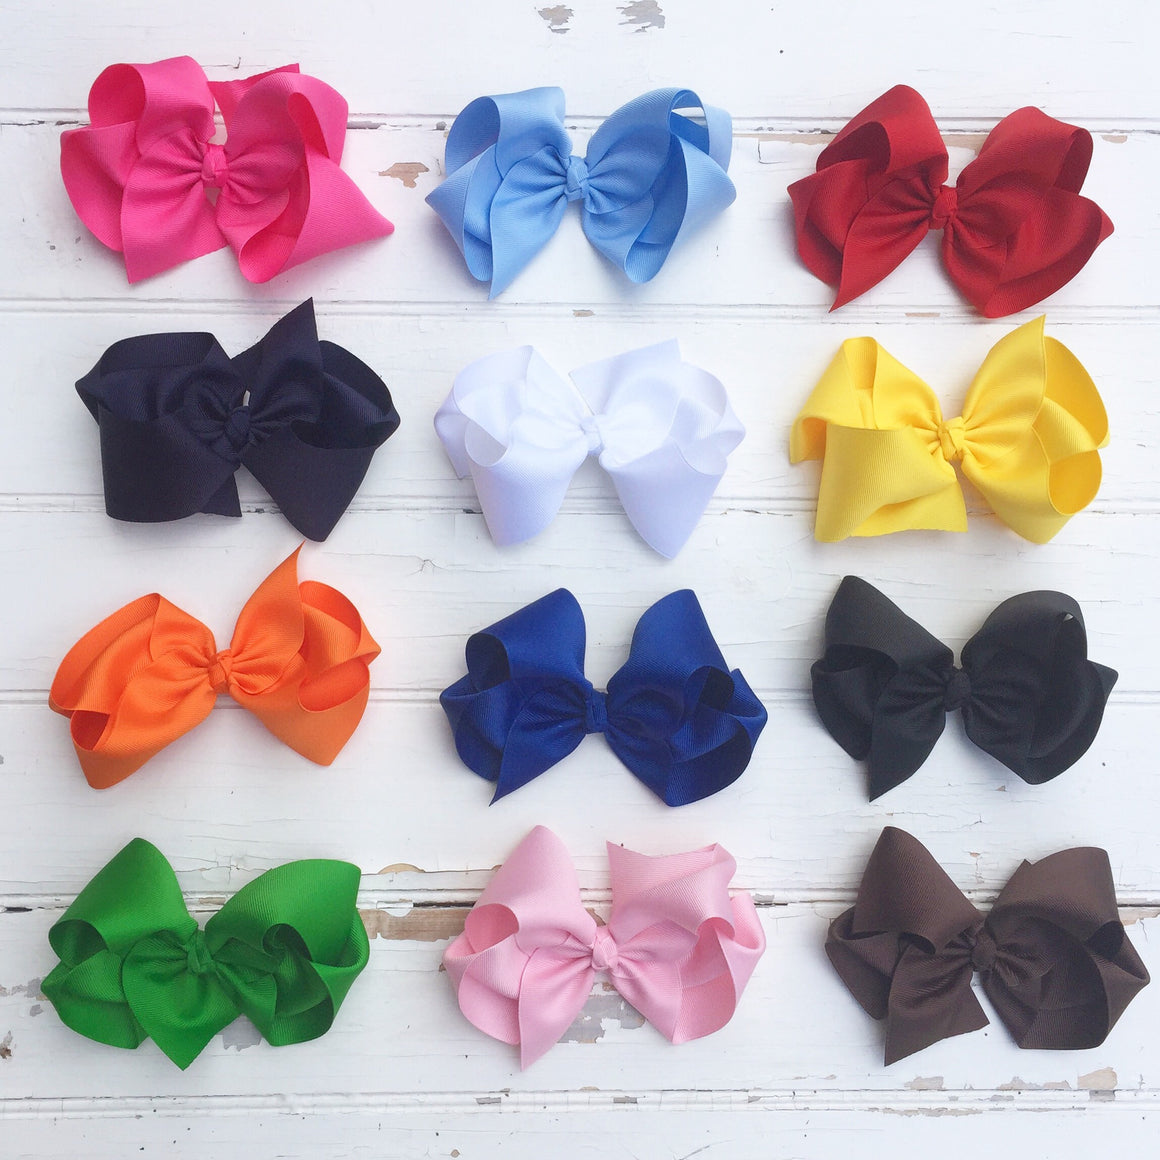 Classic 5" Hair Bow in Pink Blue Red Black White Yellow Orange Green Brown